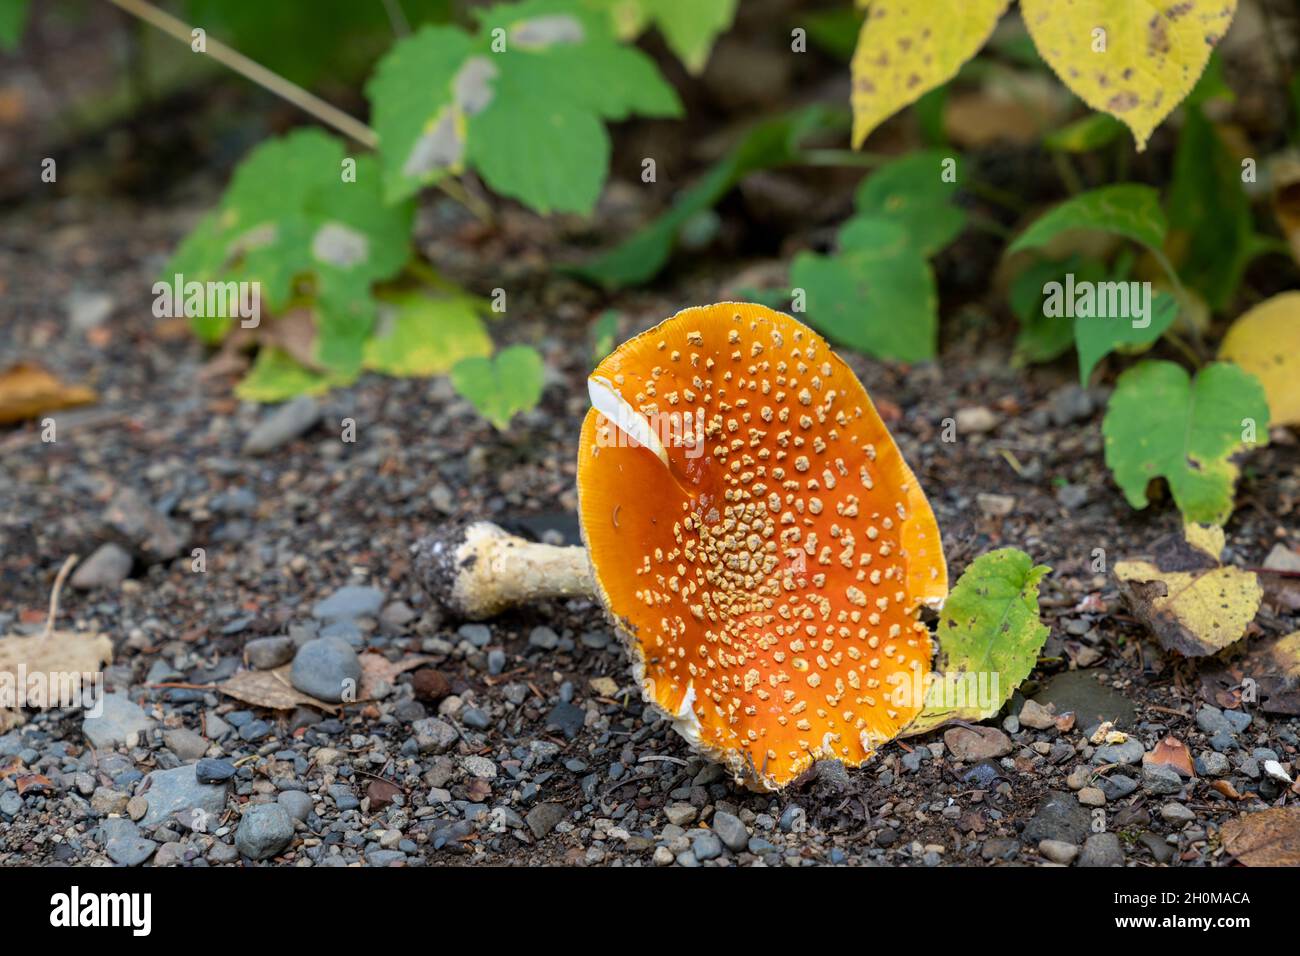 A Fly Agaric mushroom, uprooted on the forest floor, taken in Grand Portage State Park in Minnesota Stock Photo